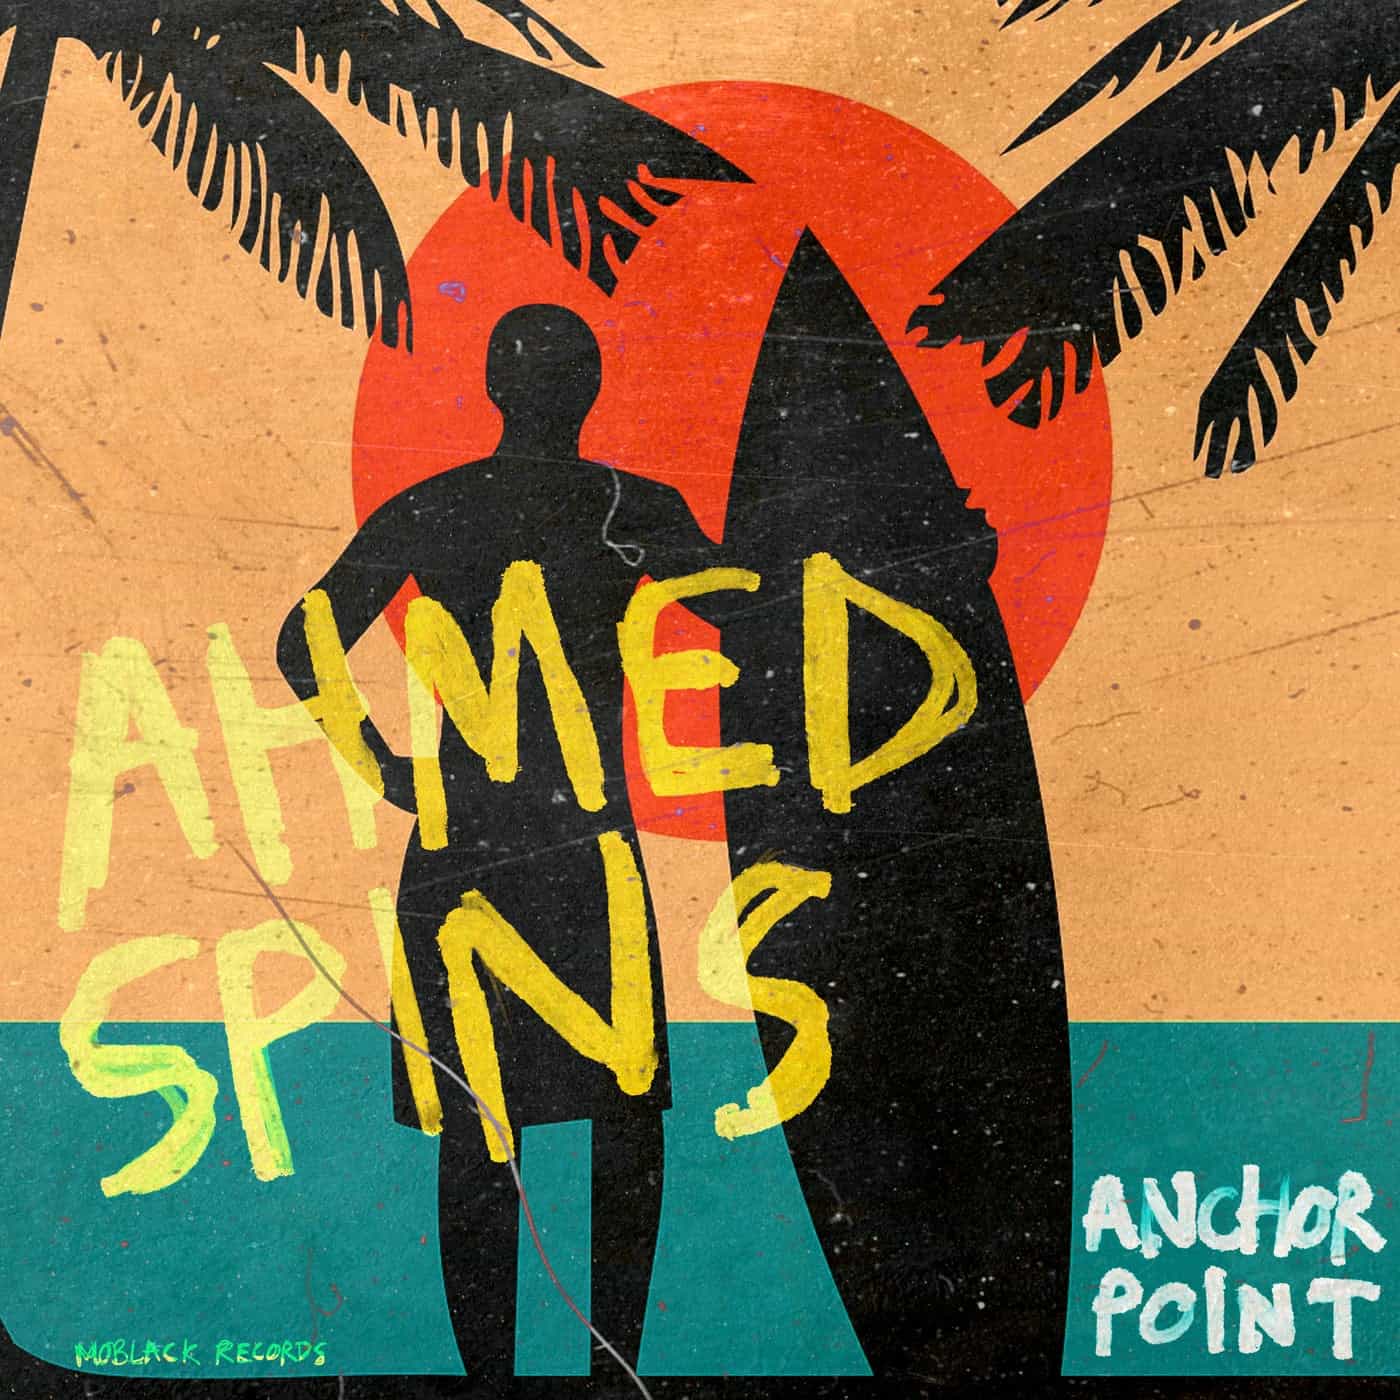 image cover: Stevo Atambire, Ahmed Spins, Lizwi - Anchor Point EP / MBR487